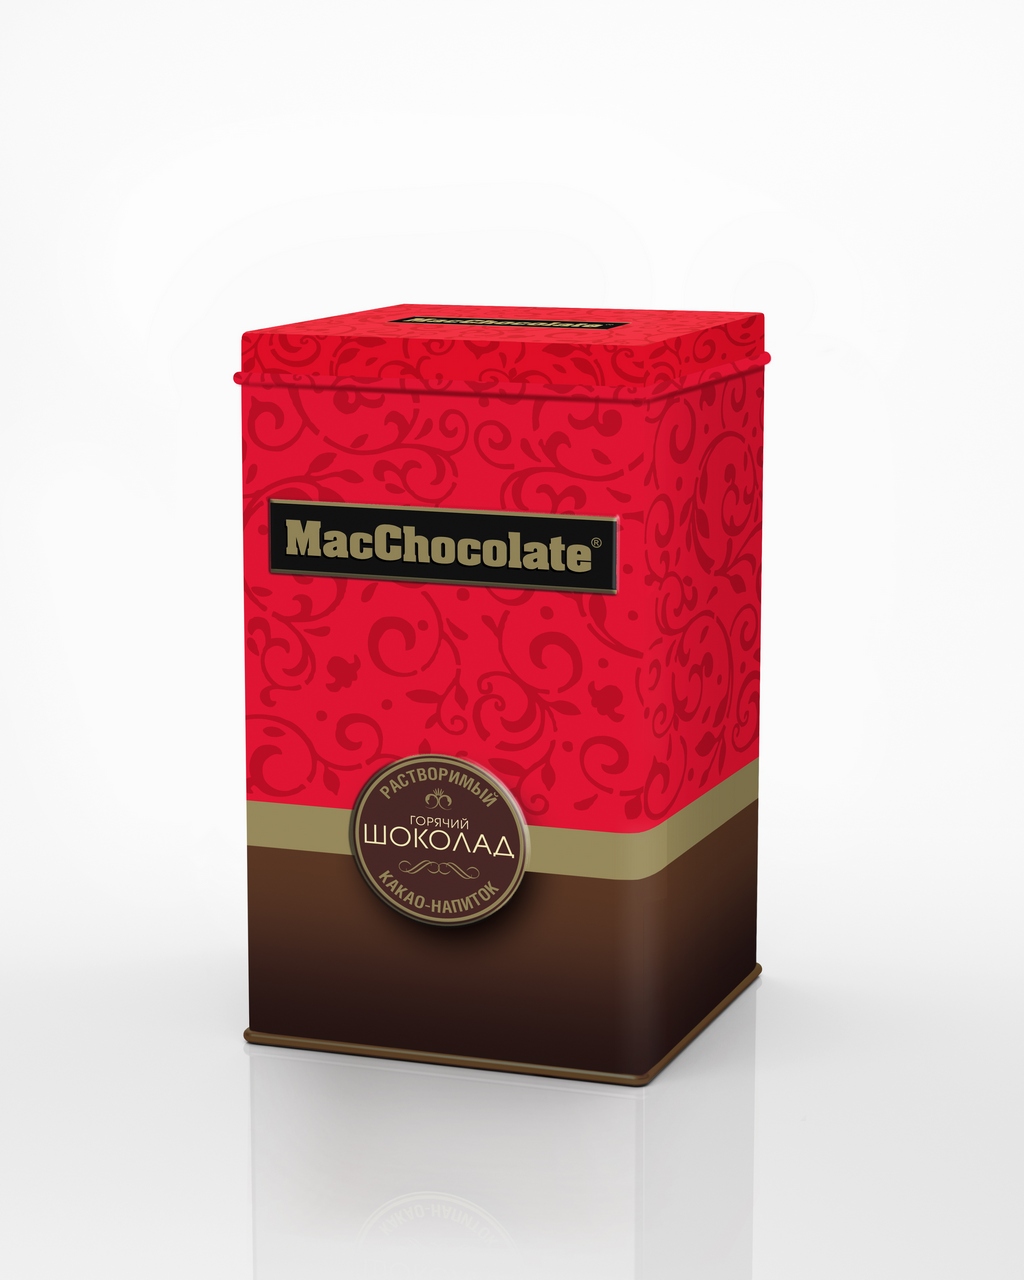 MacChocolate in a holiday tin!